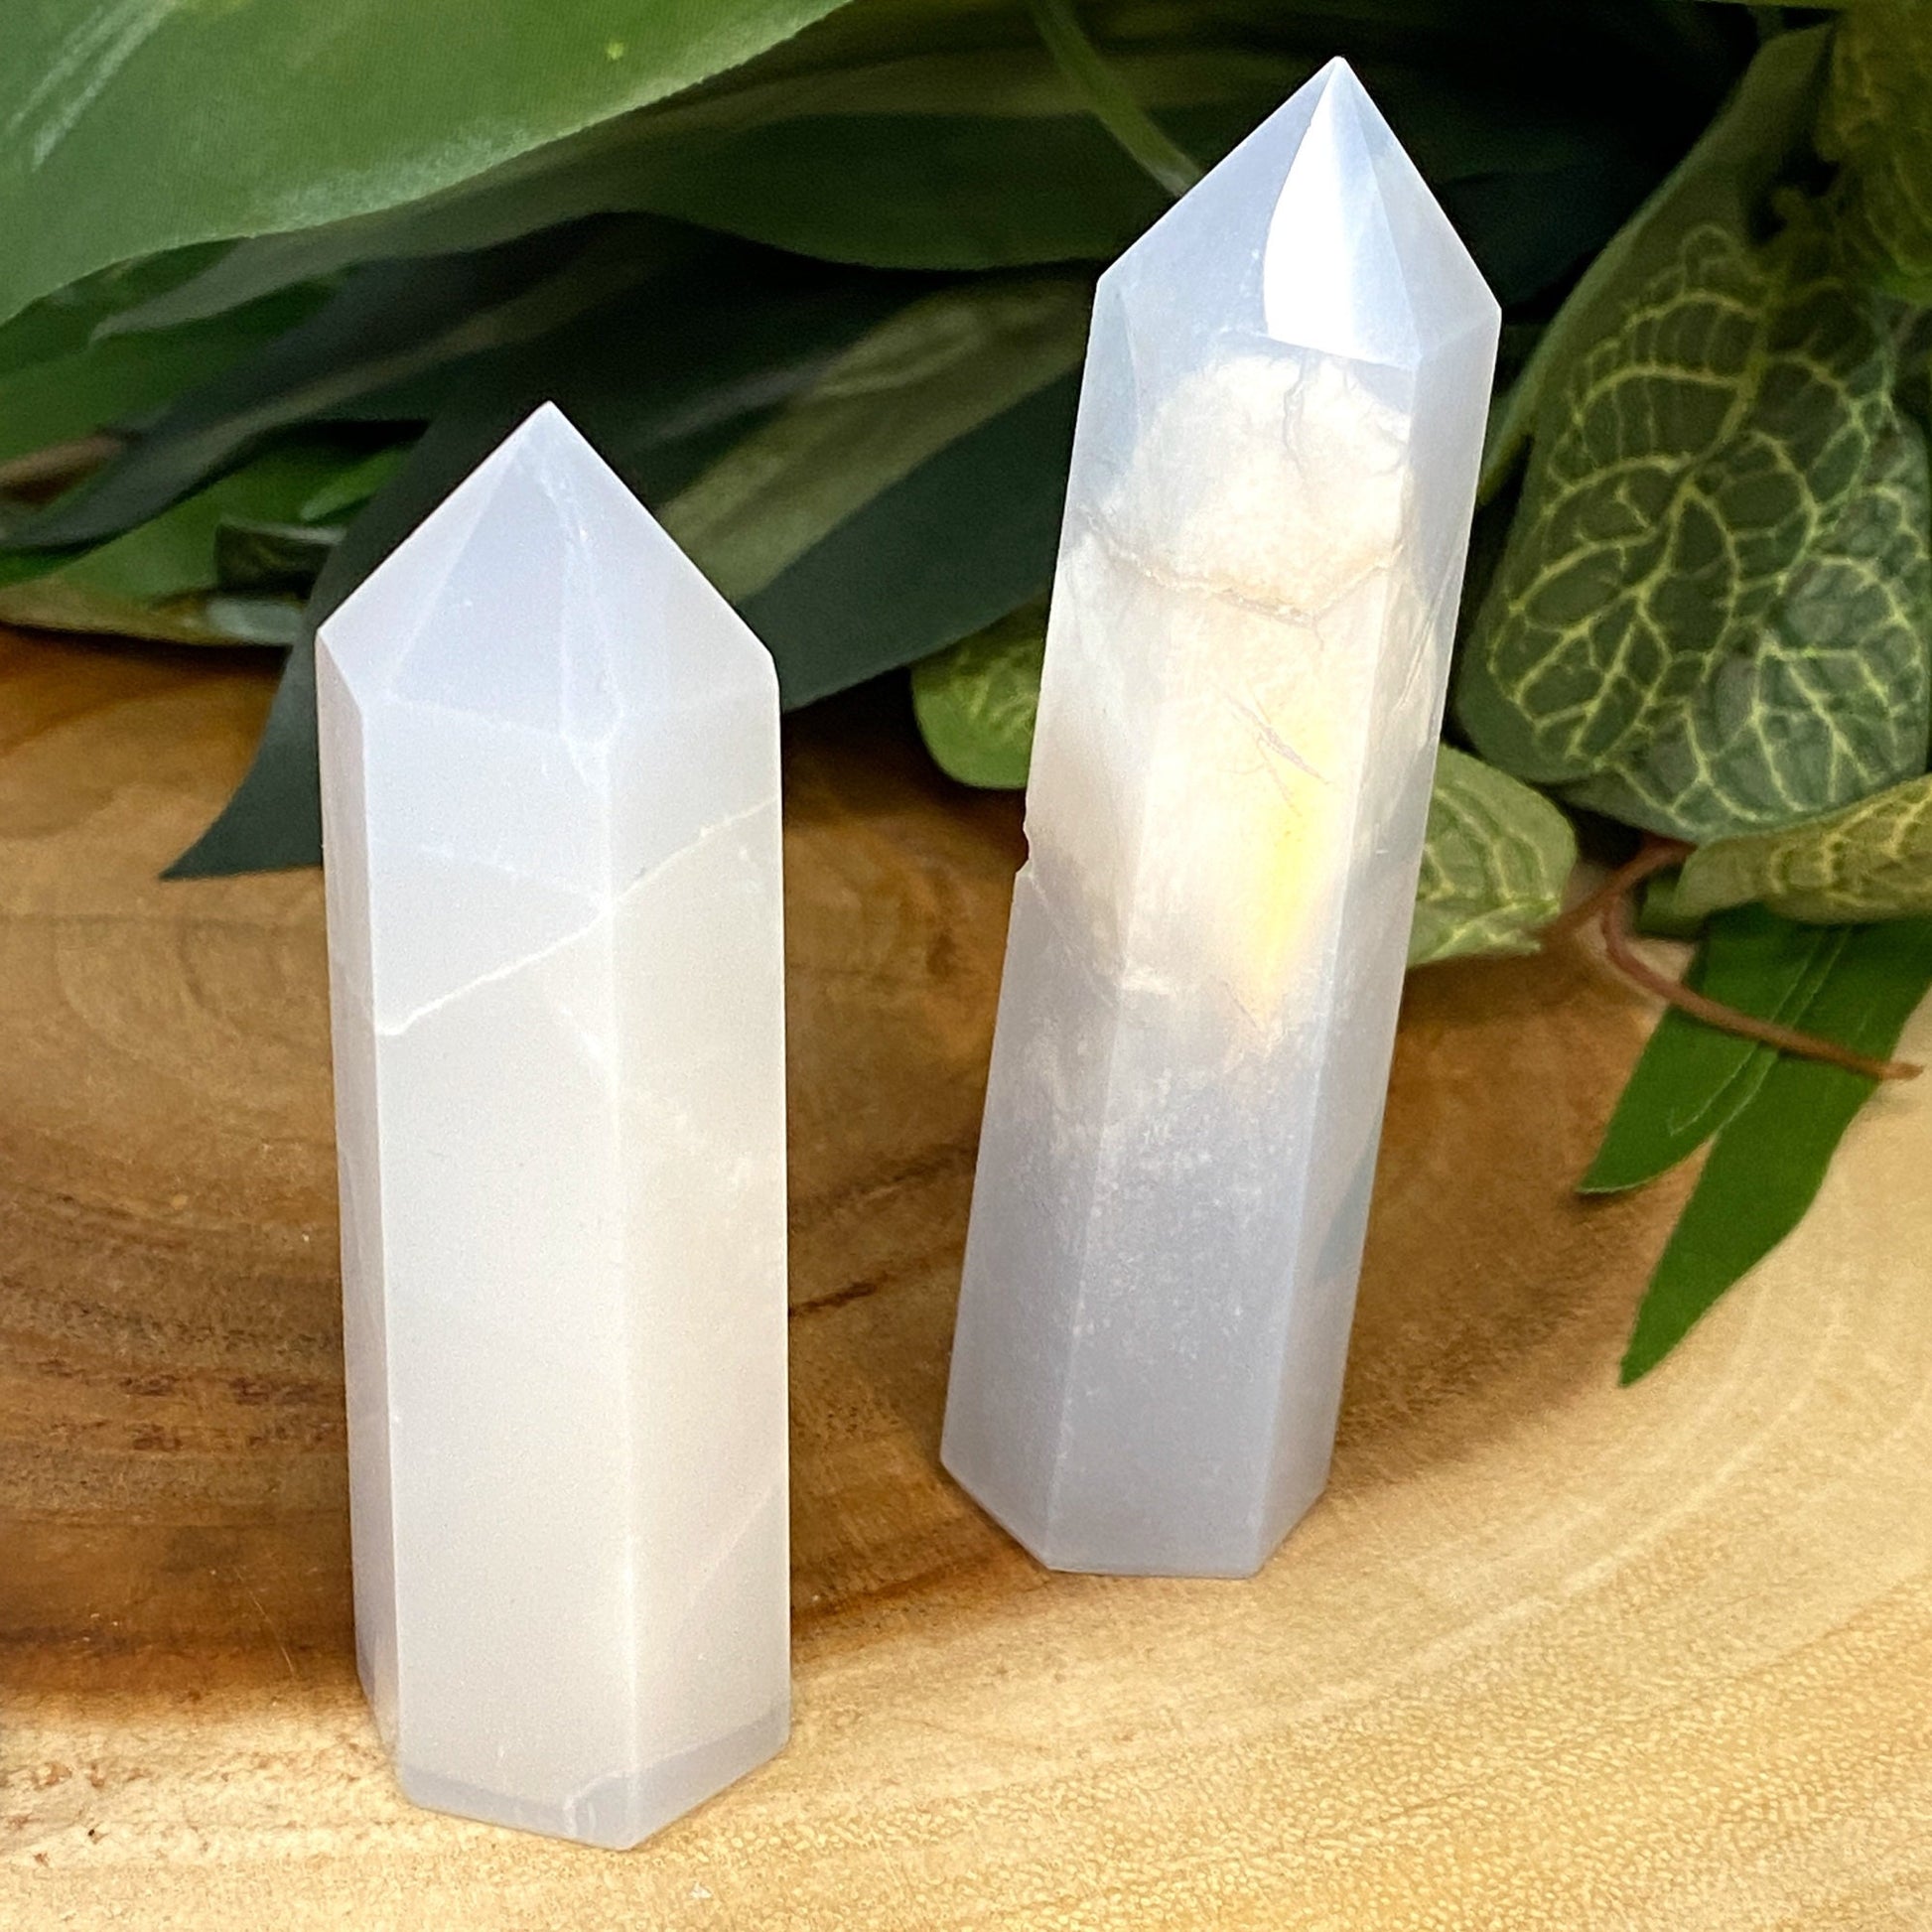 Natural Blue Chalcedony Tower Point from Turkey - Blue Crystal for Meditation, Crystal Grids, Healing, Reiki Chakra, Altars, Wand